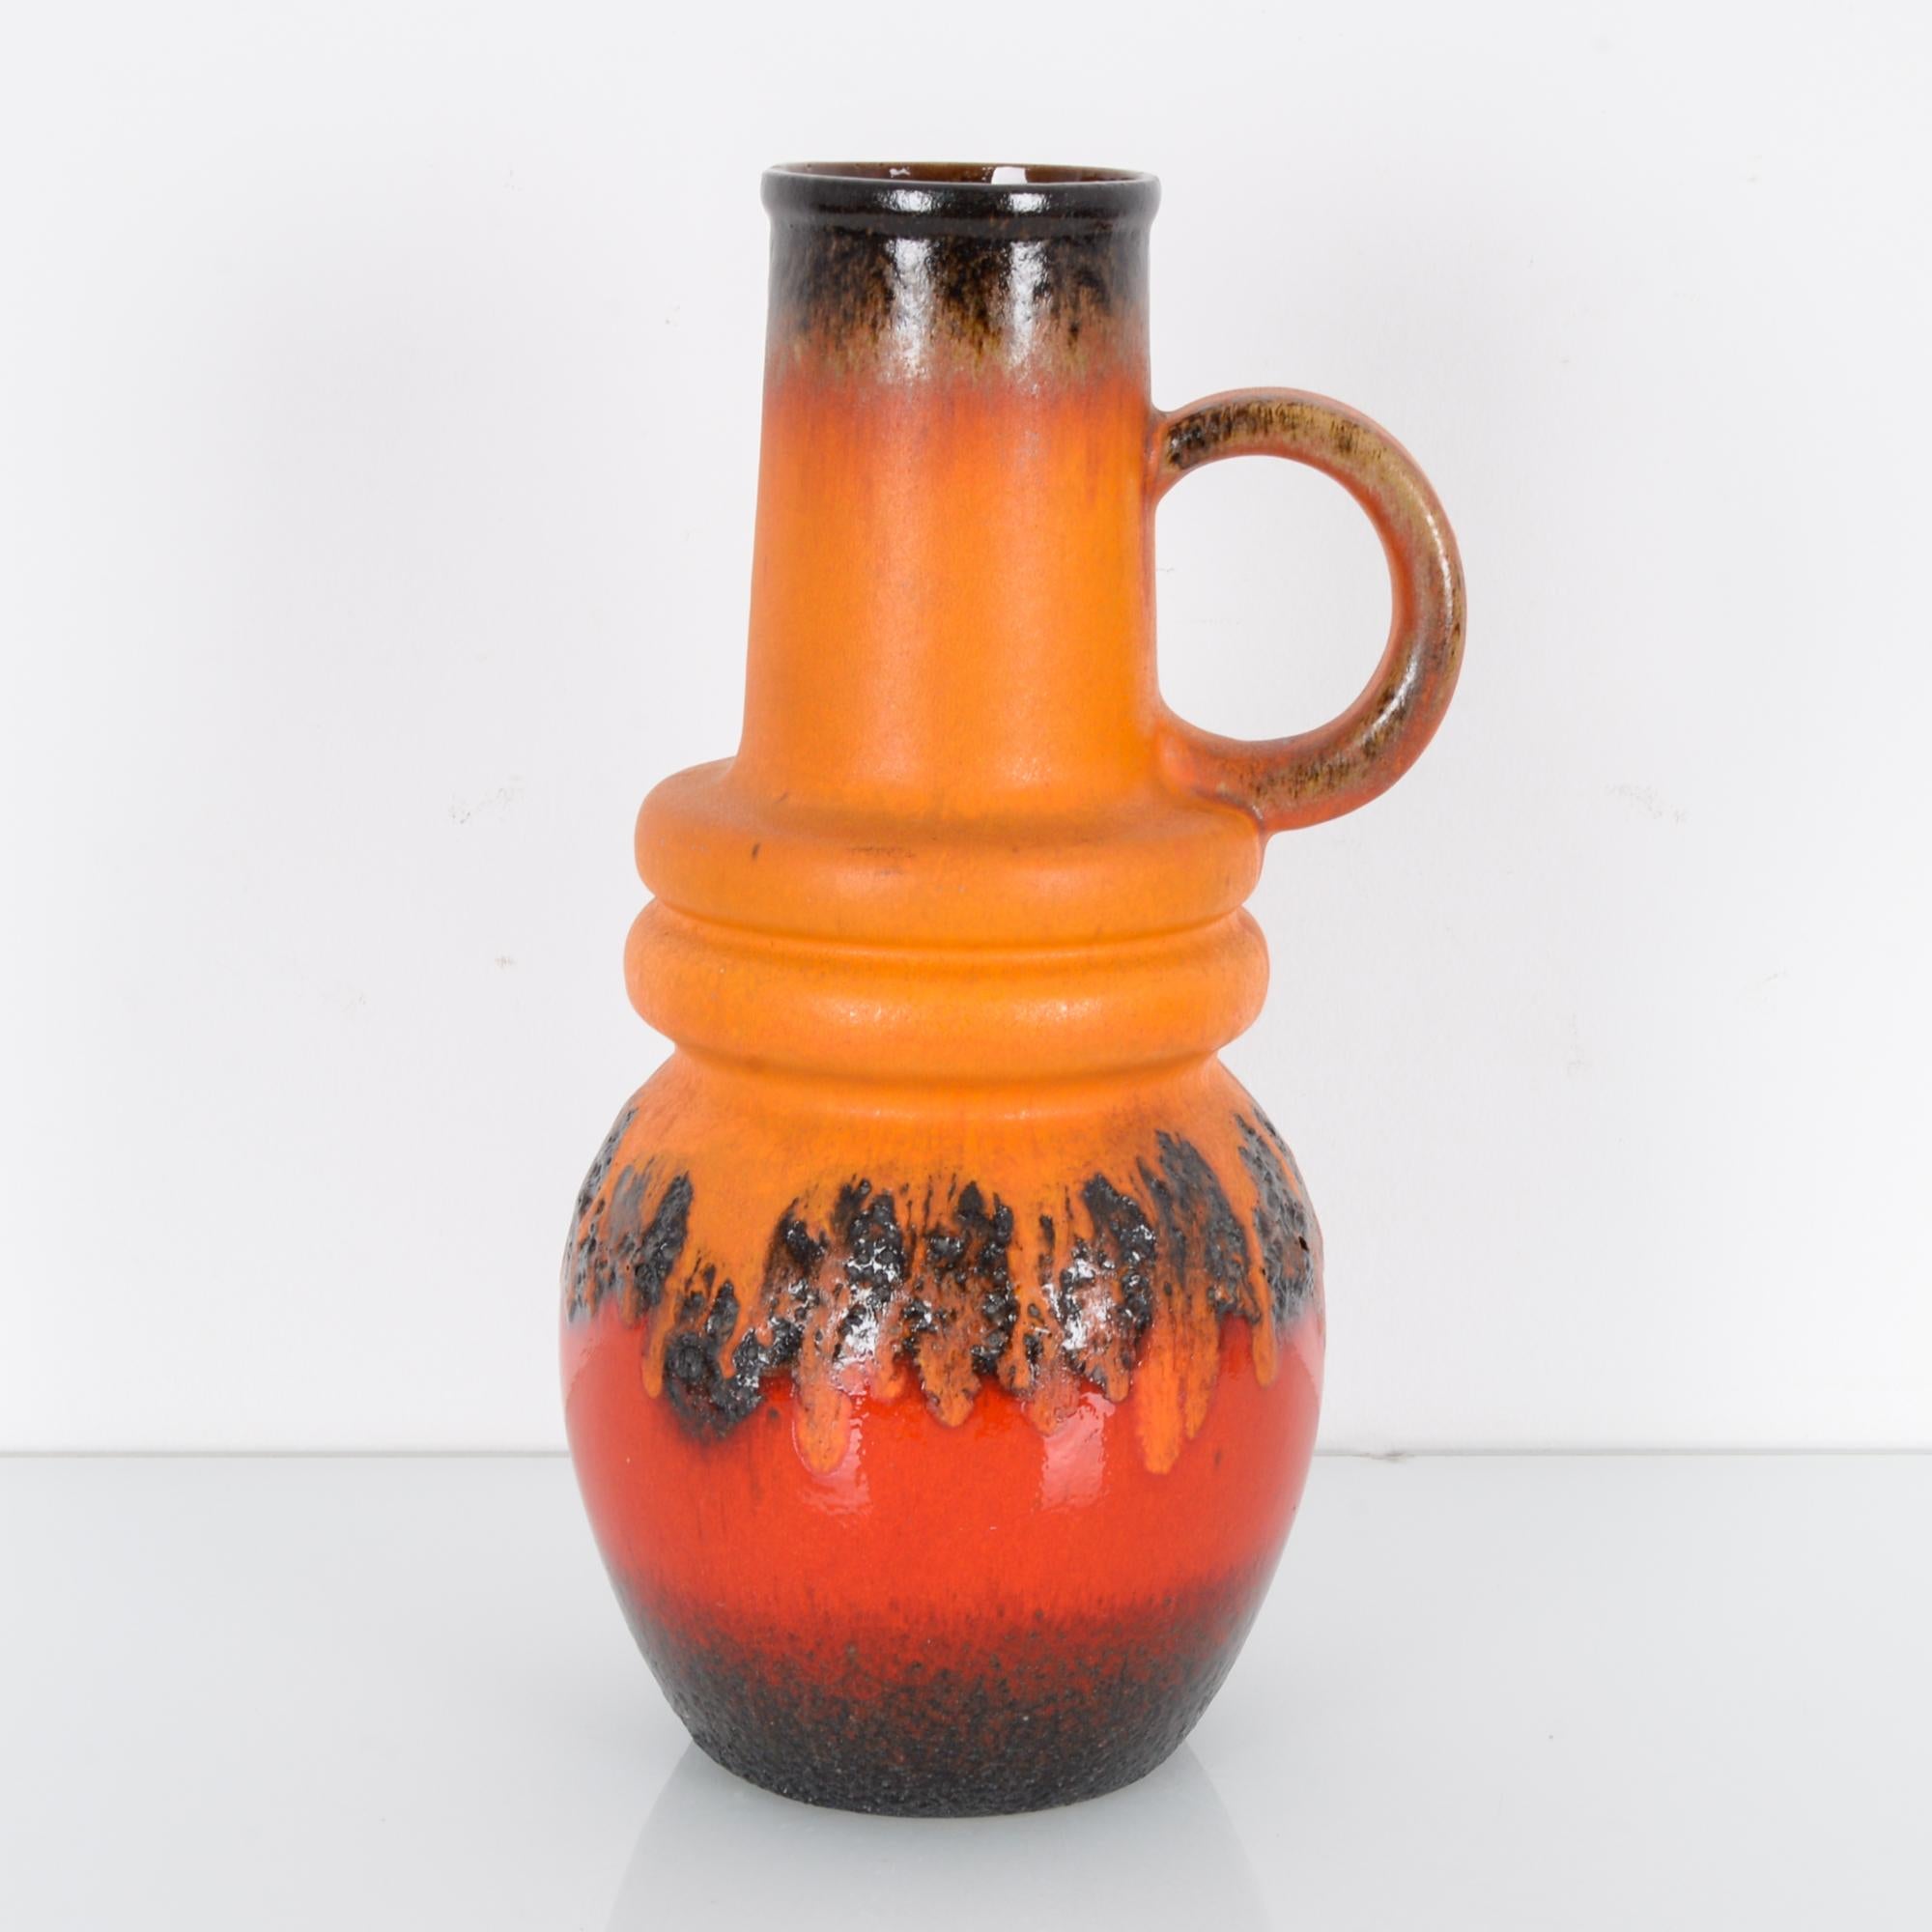 A 50 cm ceramic vase in vibrant orange-red glaze produced in West Germany, circa 1950. West German art pottery focused on single decorative pieces like vases and jugs, rather than sets of tableware, which gives each piece a feeling of having its own